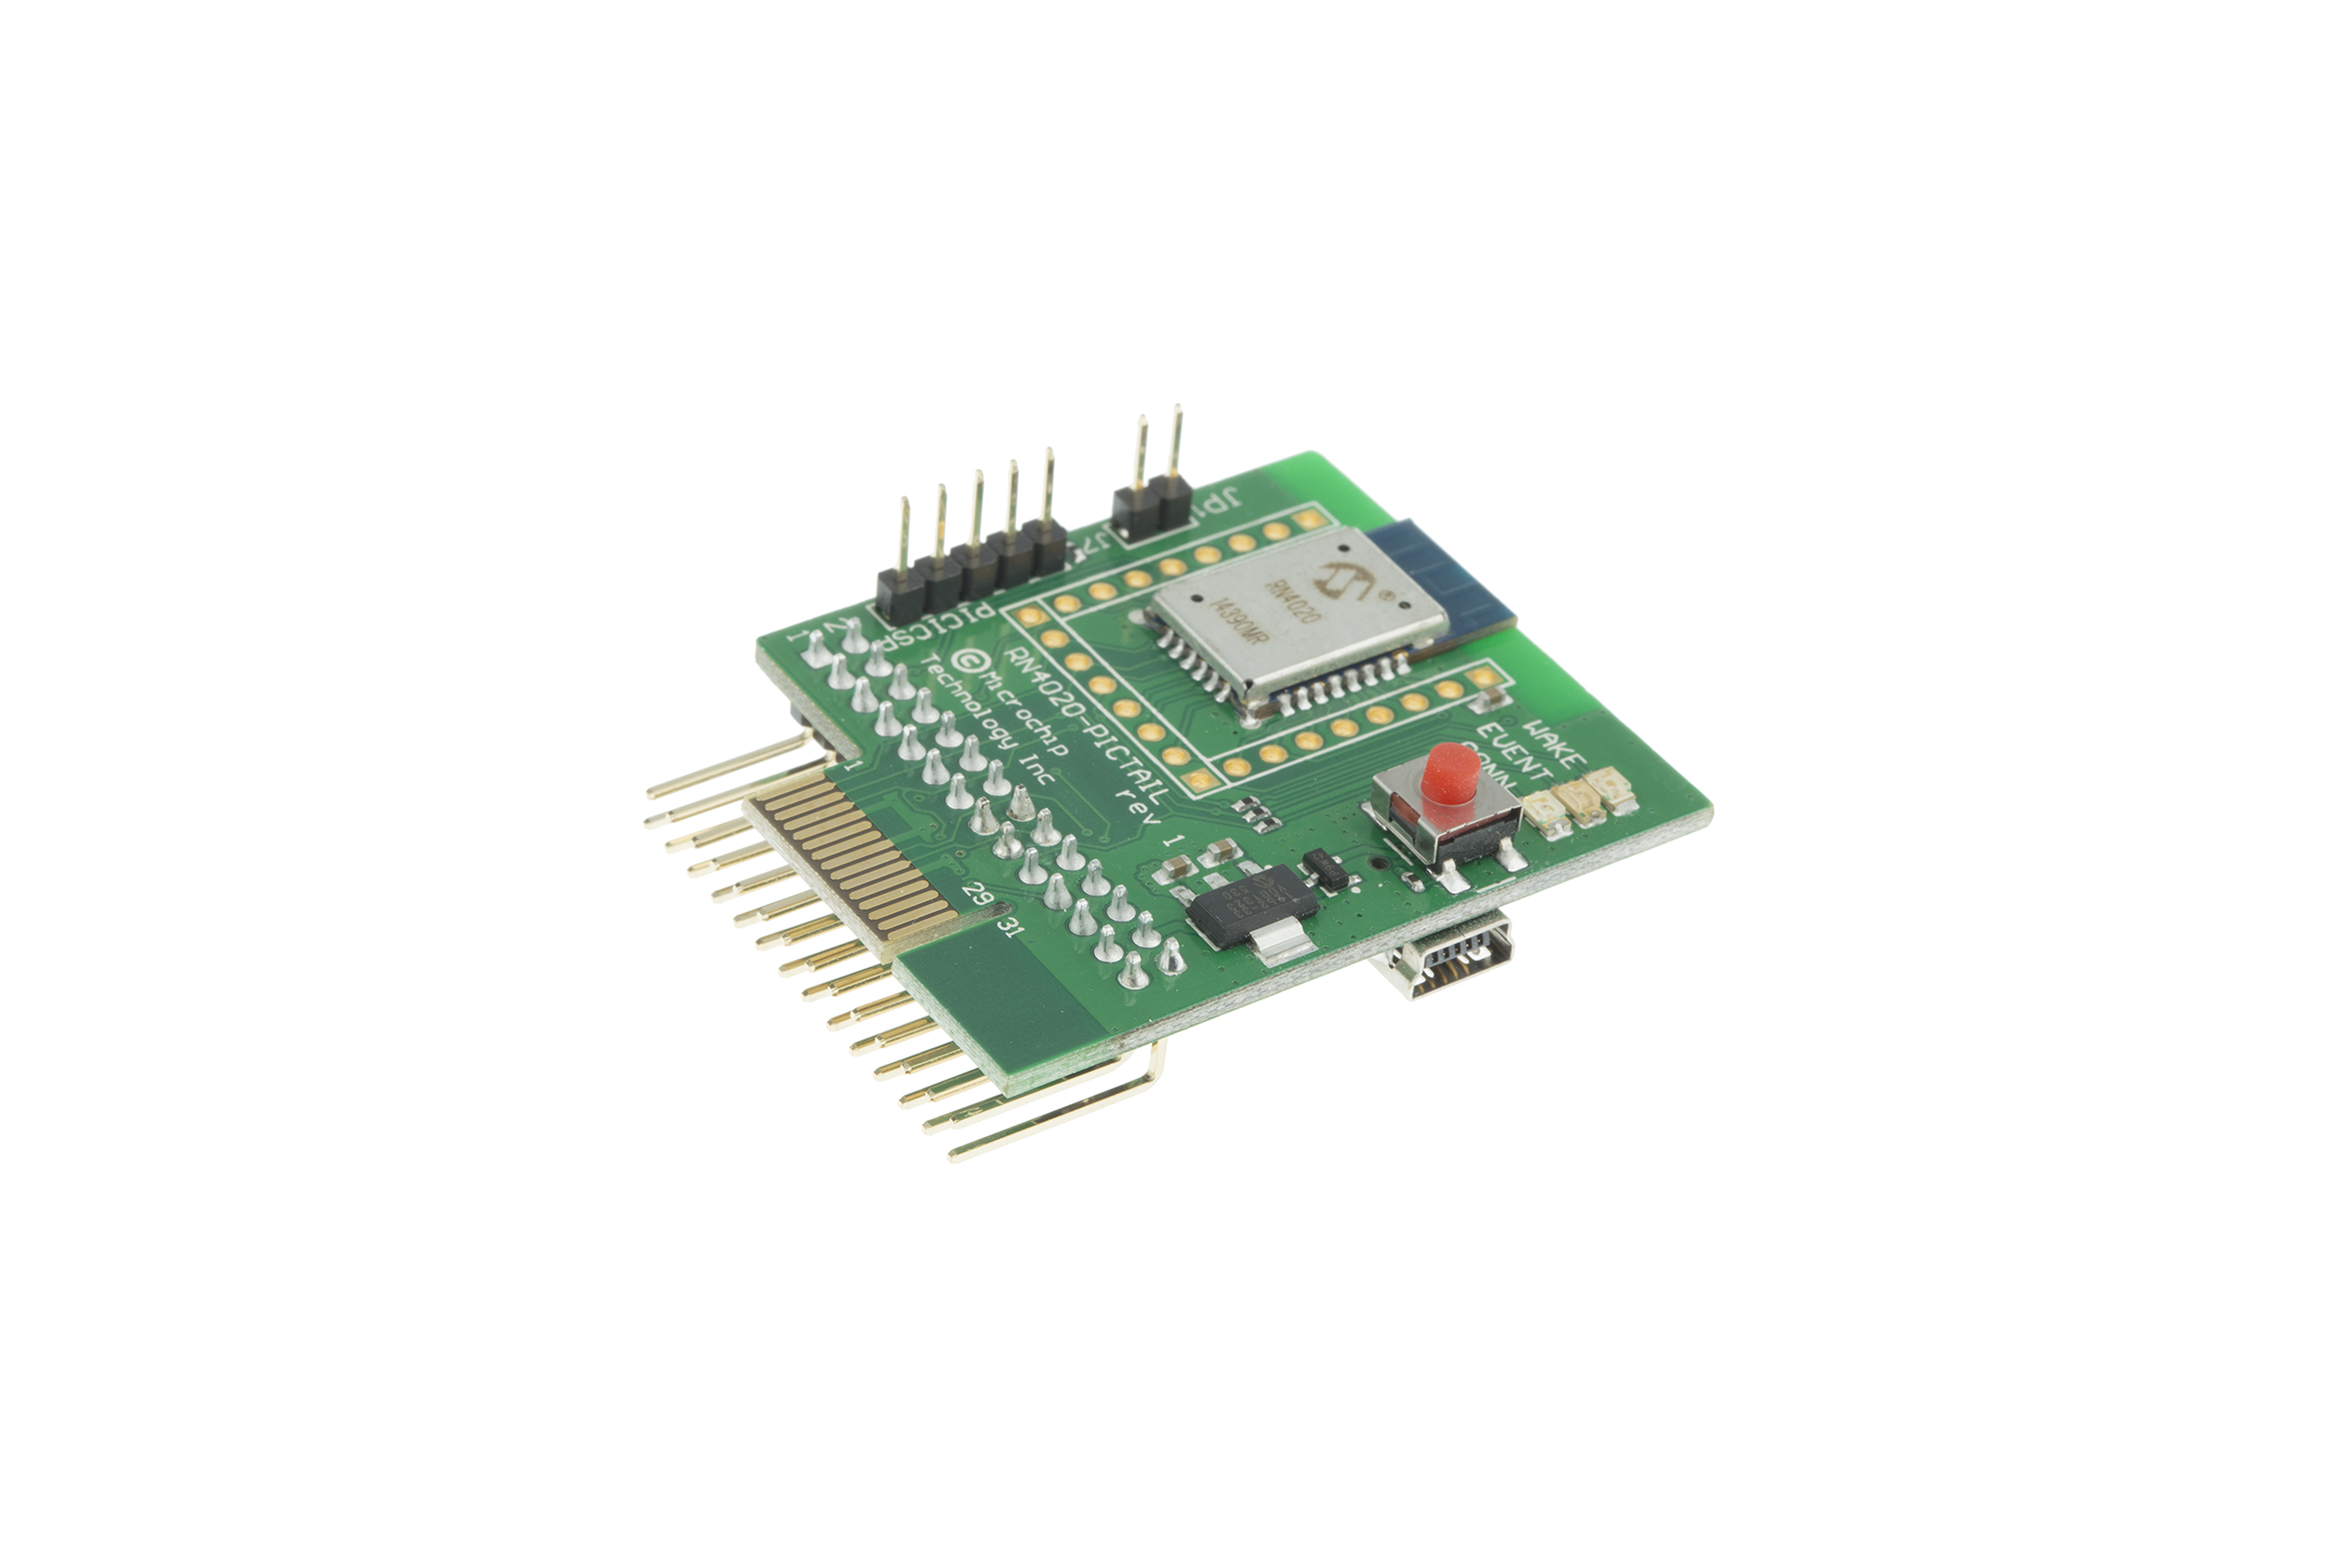 Rn4020 Bluetooth Lowenergy Pictail Board